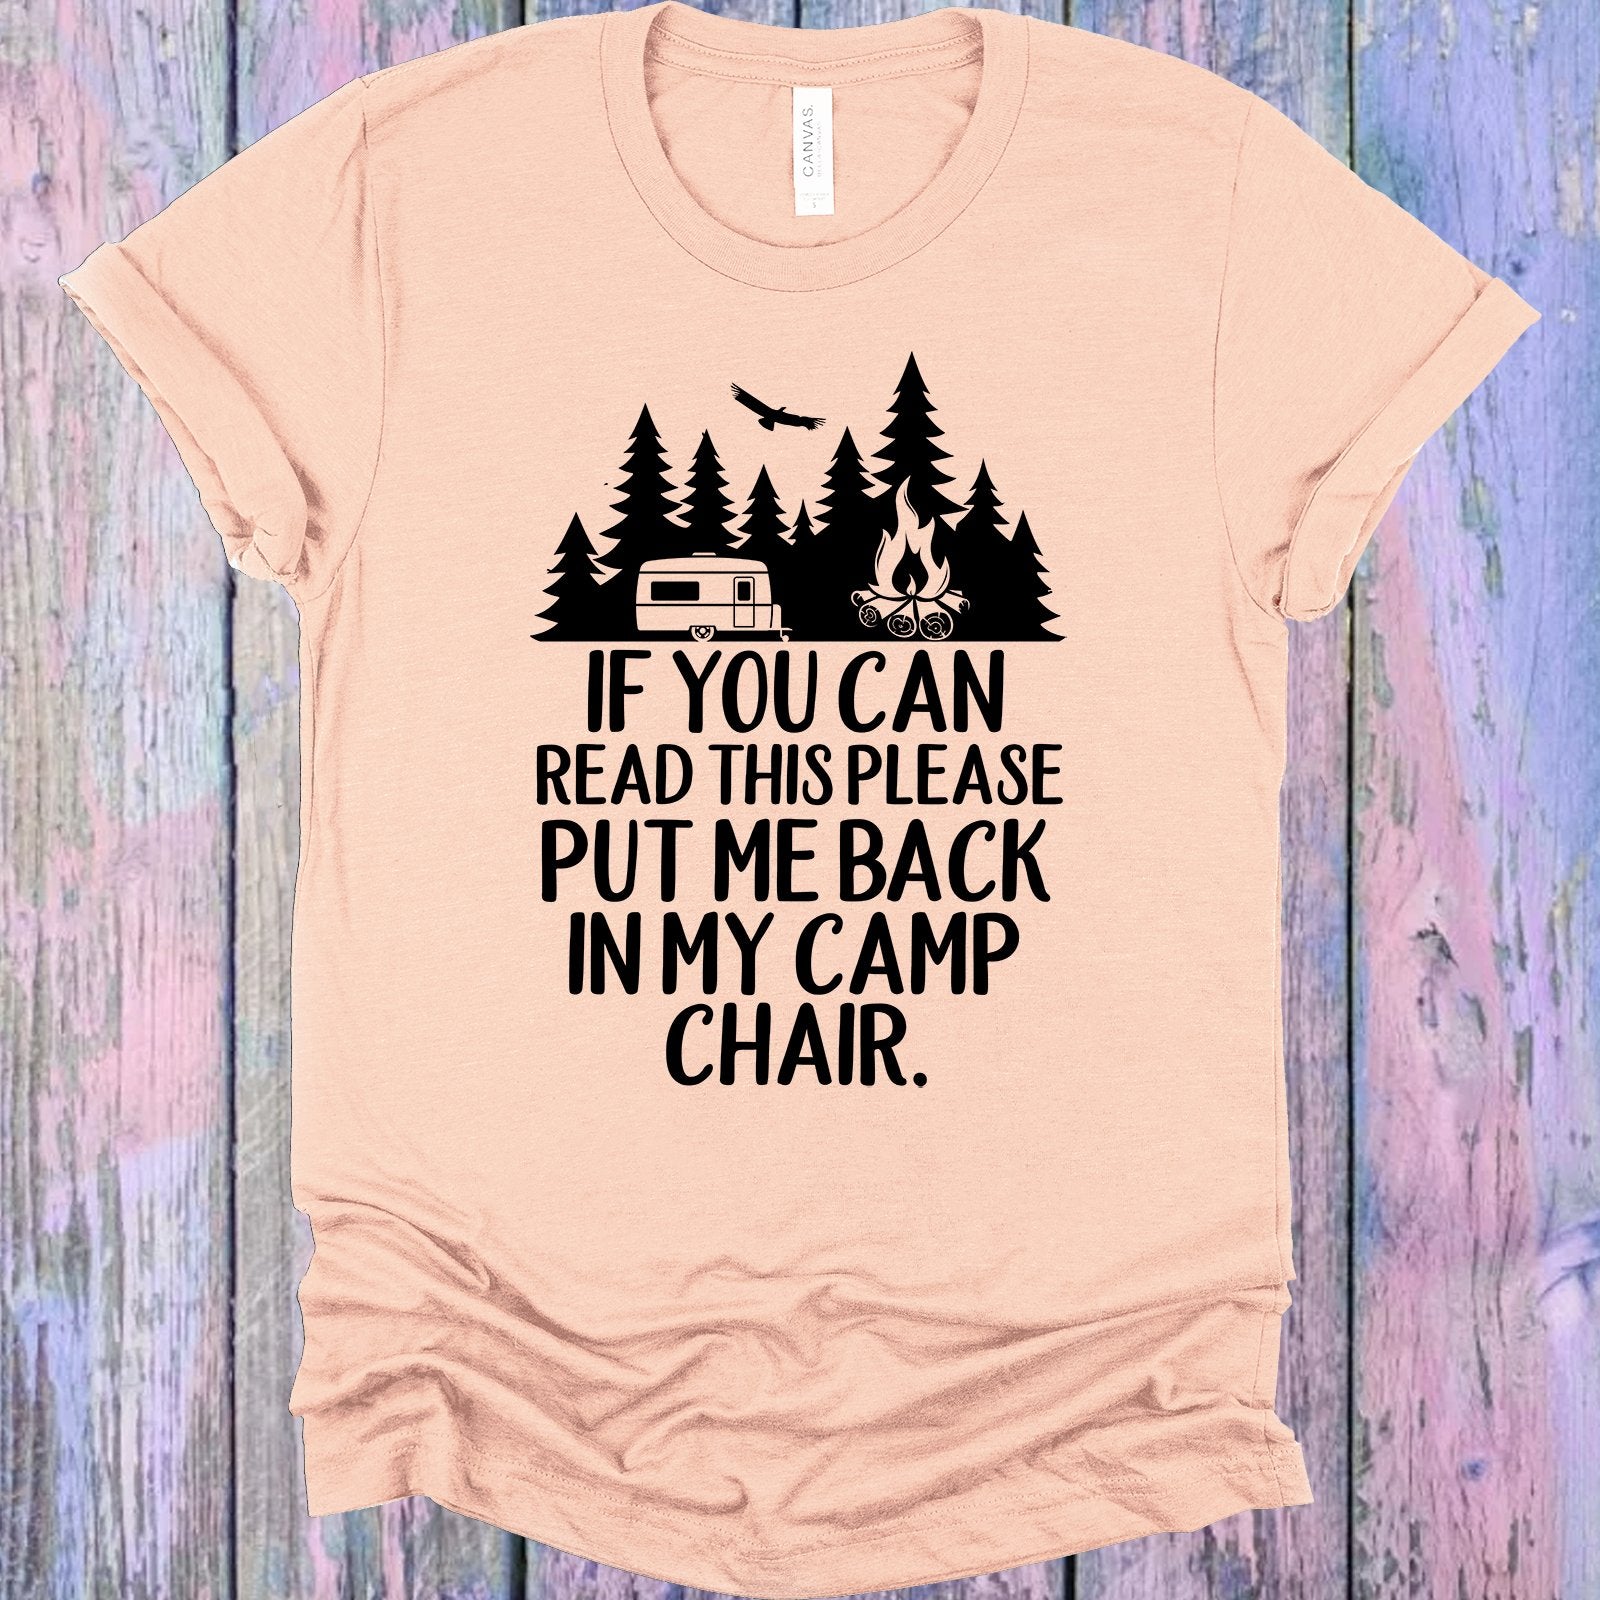 If You Can Read This Please Put Me Back In My Camp Chair Graphic Tee Graphic Tee